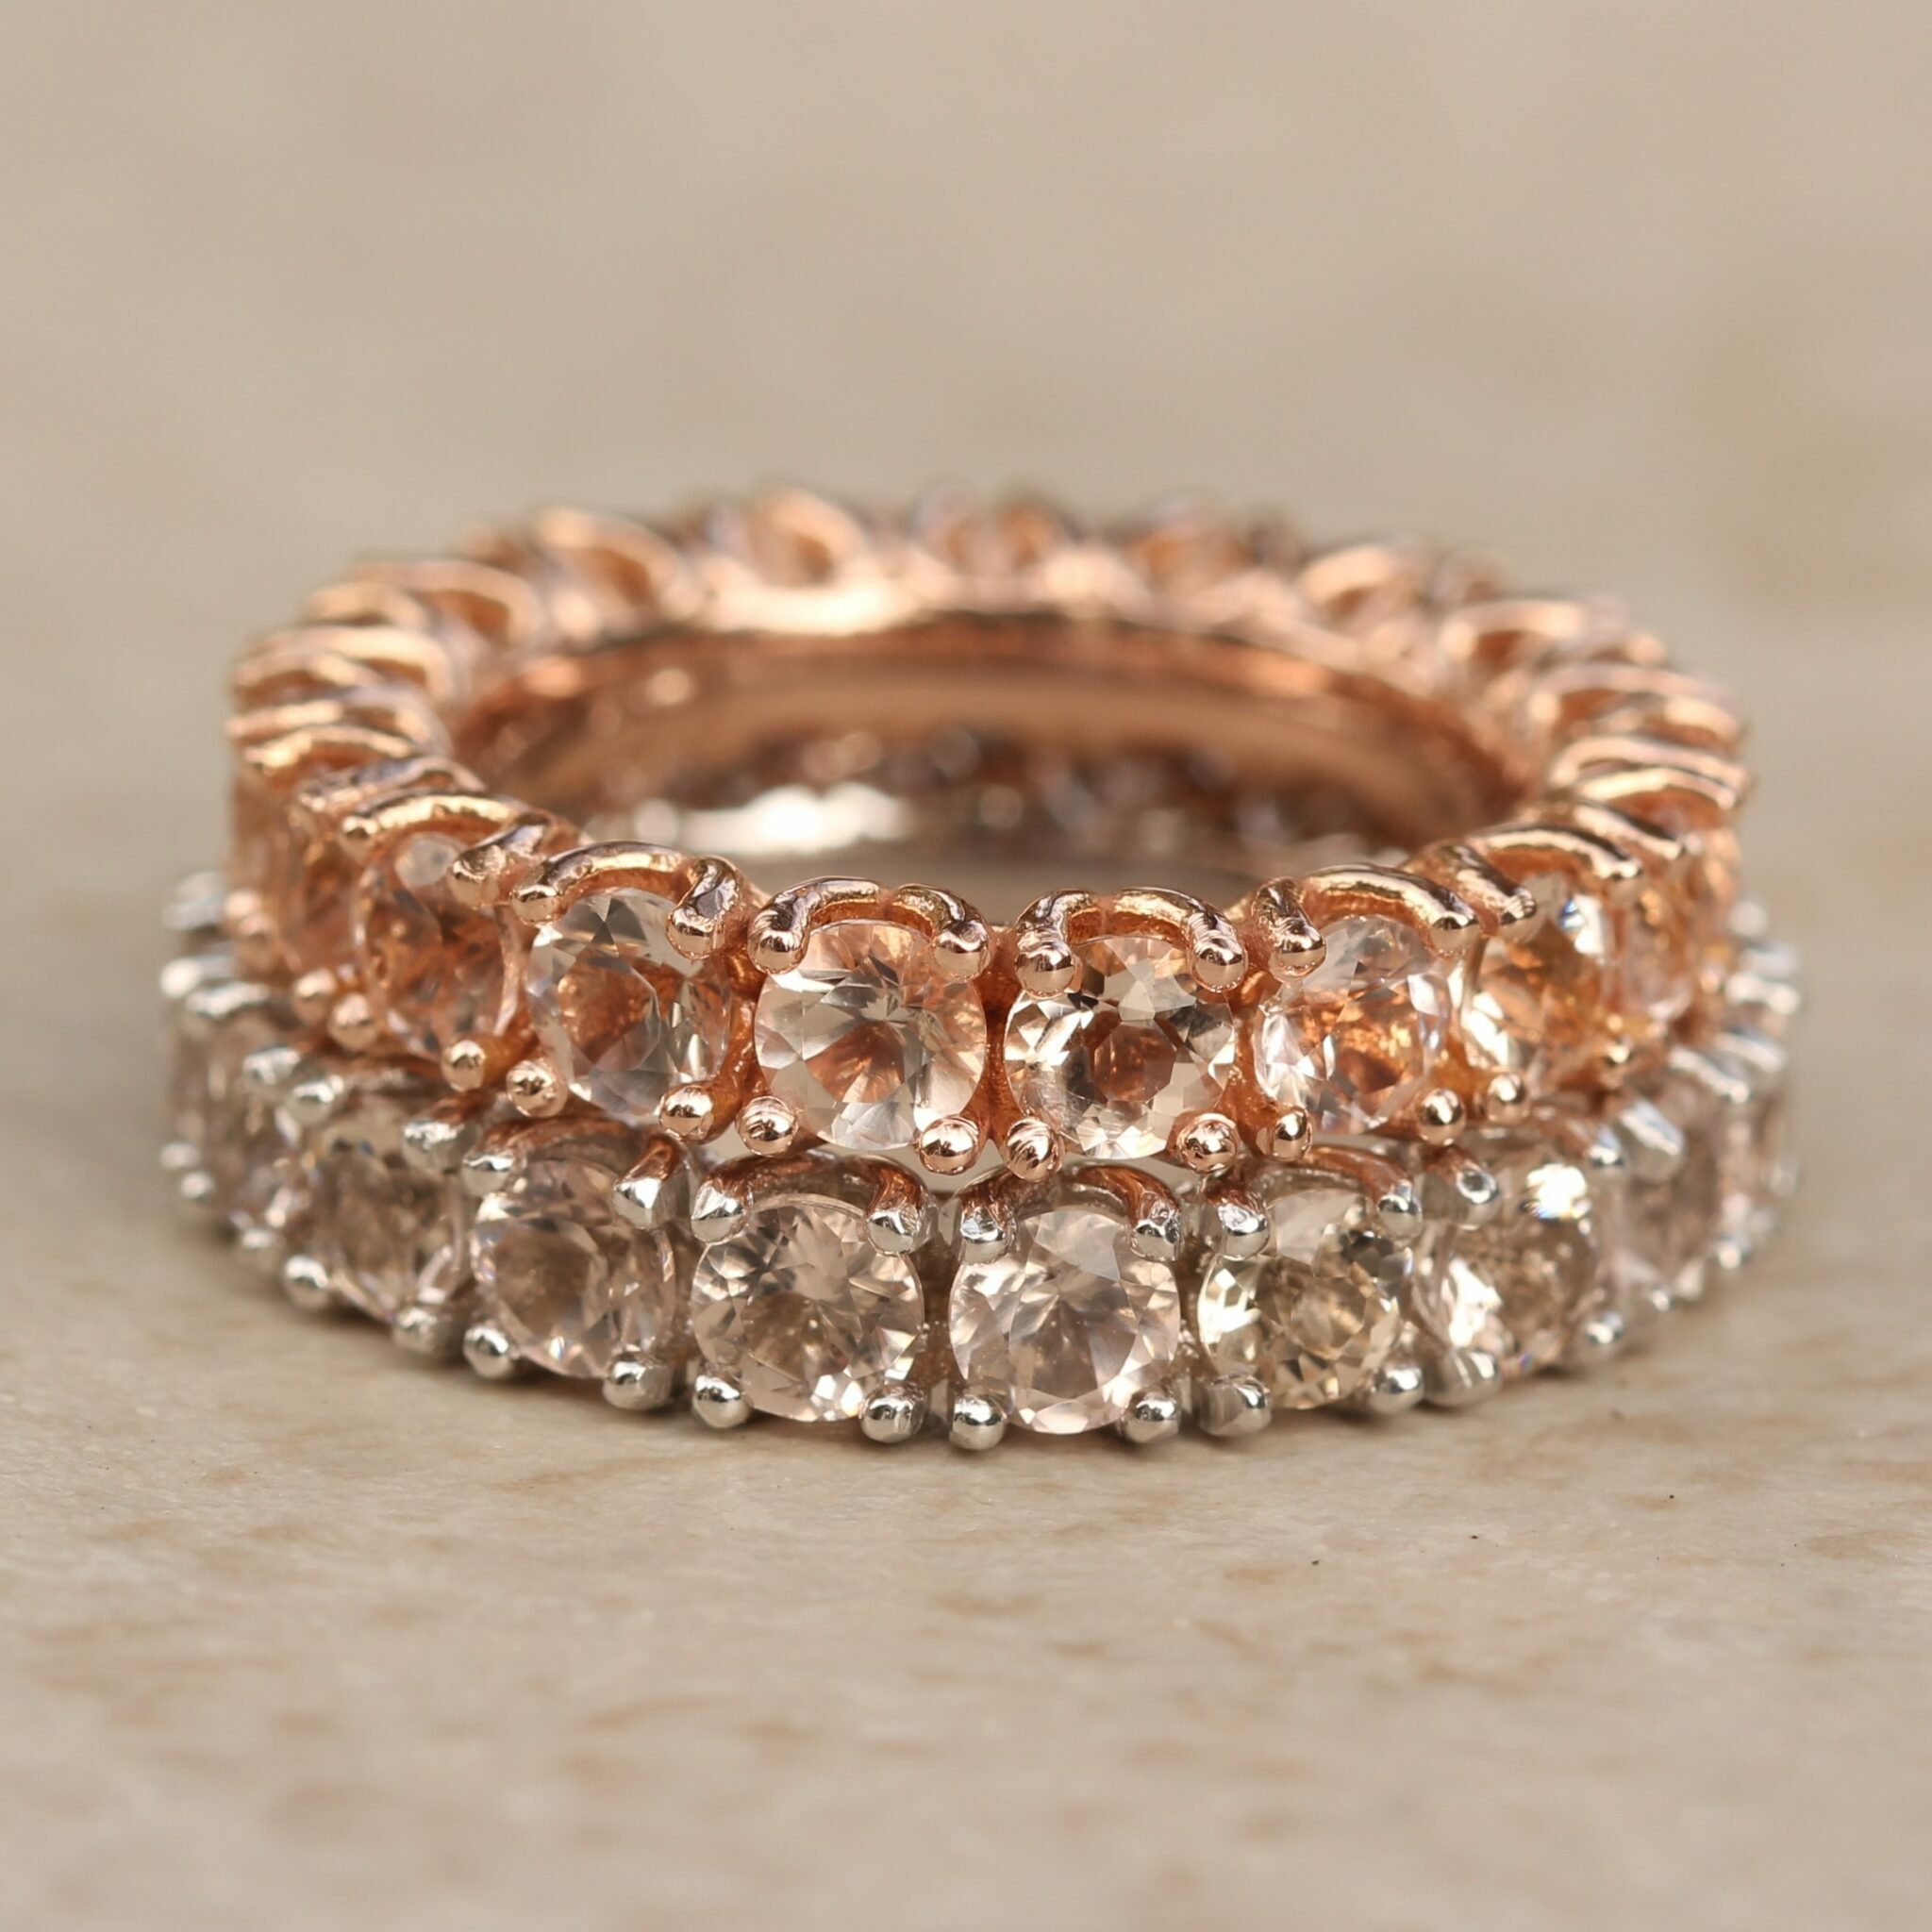 How-does-Morganite-look-in-rose-gold-versus-white-gold-LS5869